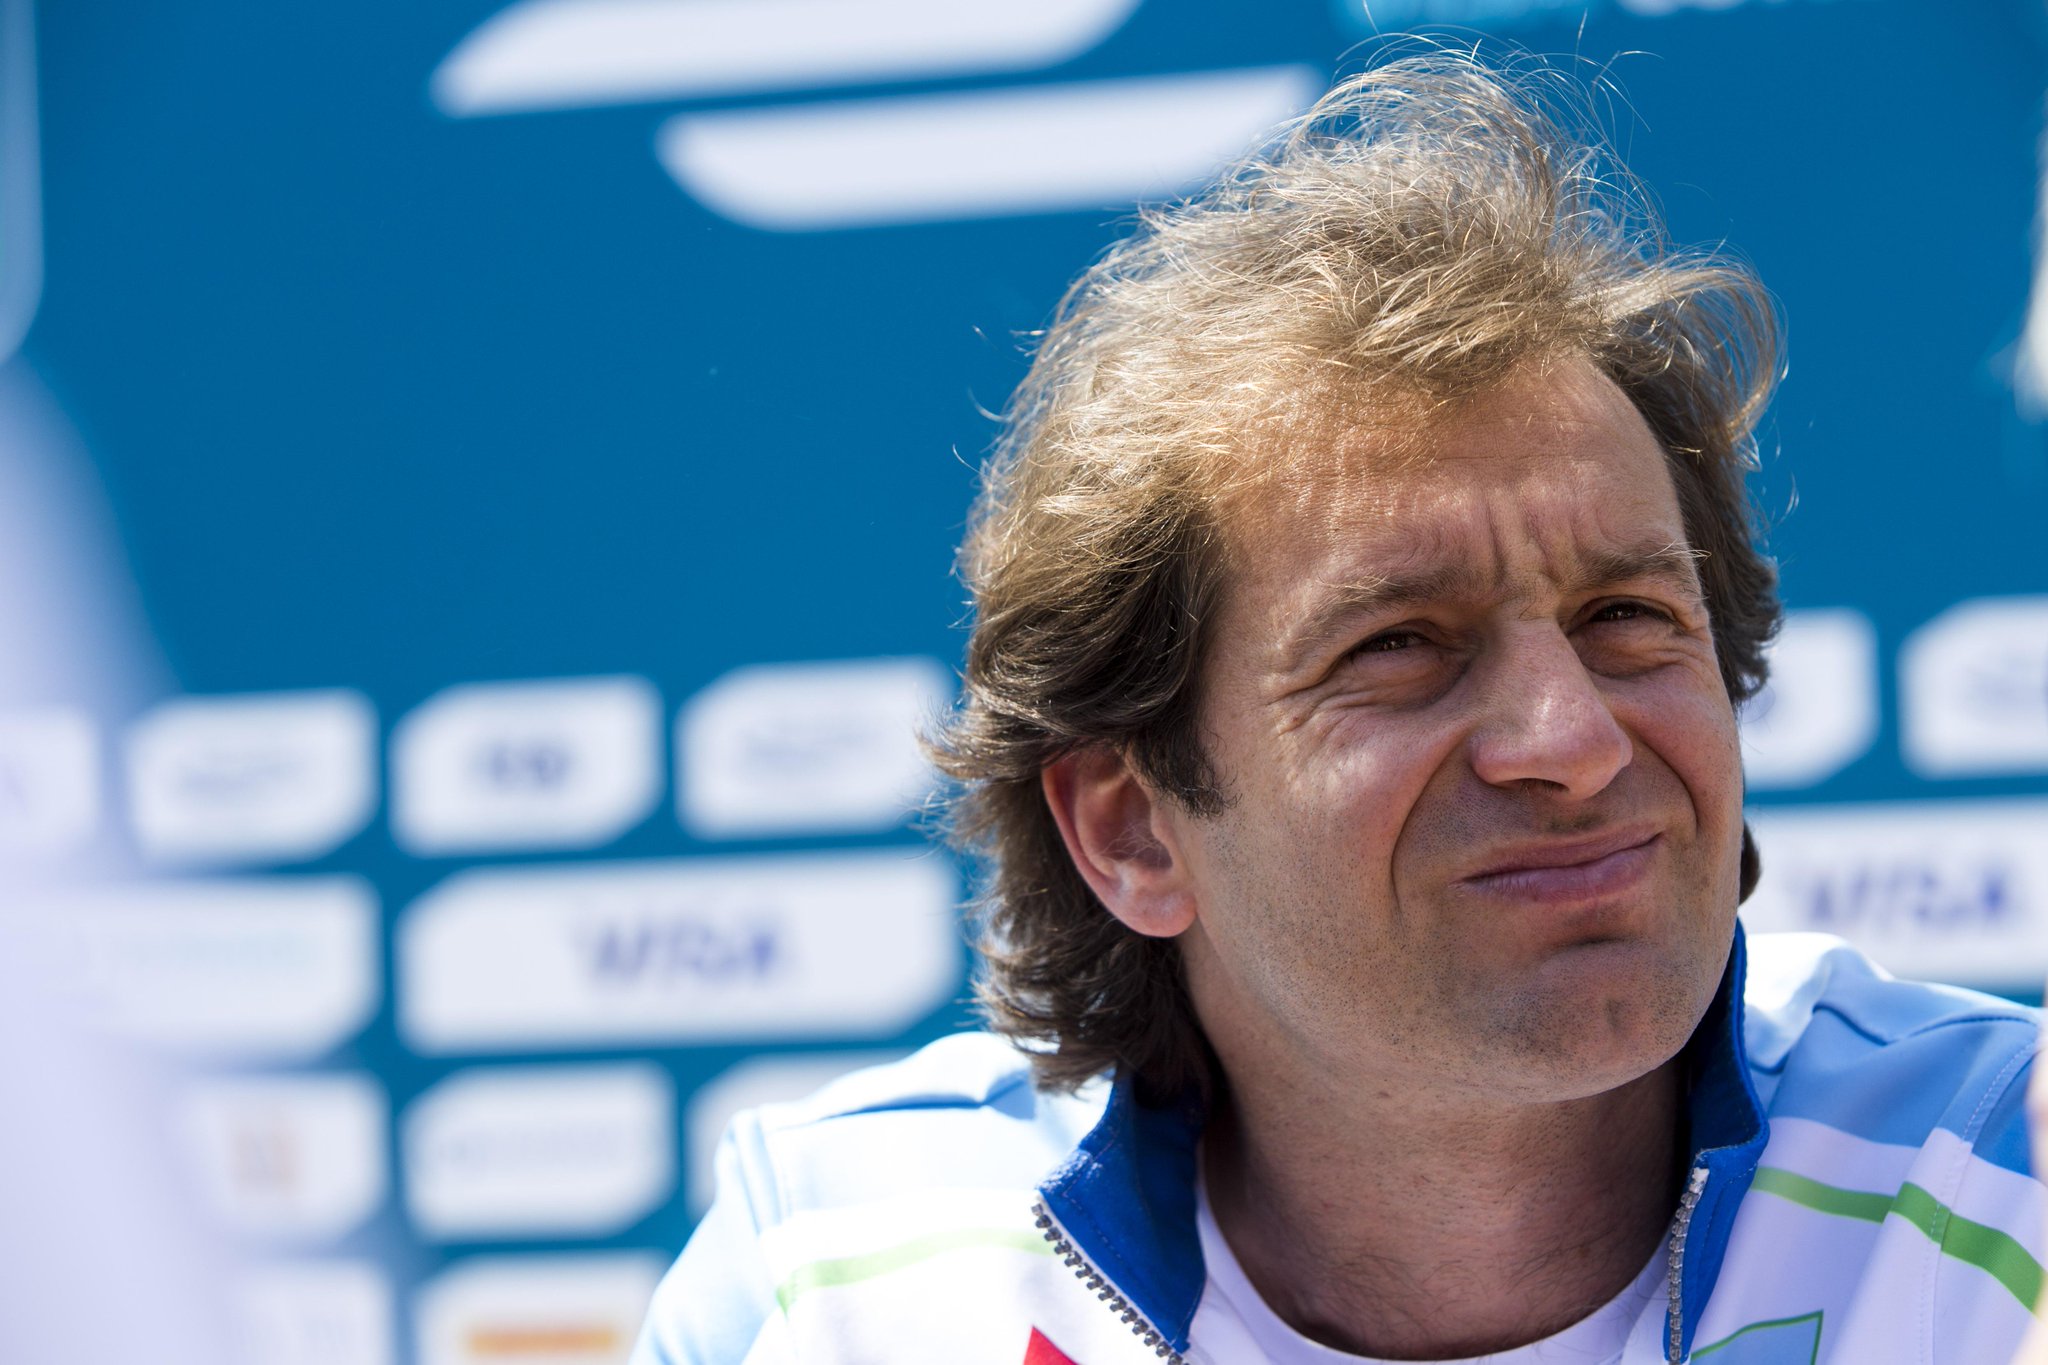 Wishing a very happy birthday to Formula E\s only owner/driver Jarno Trulli! 